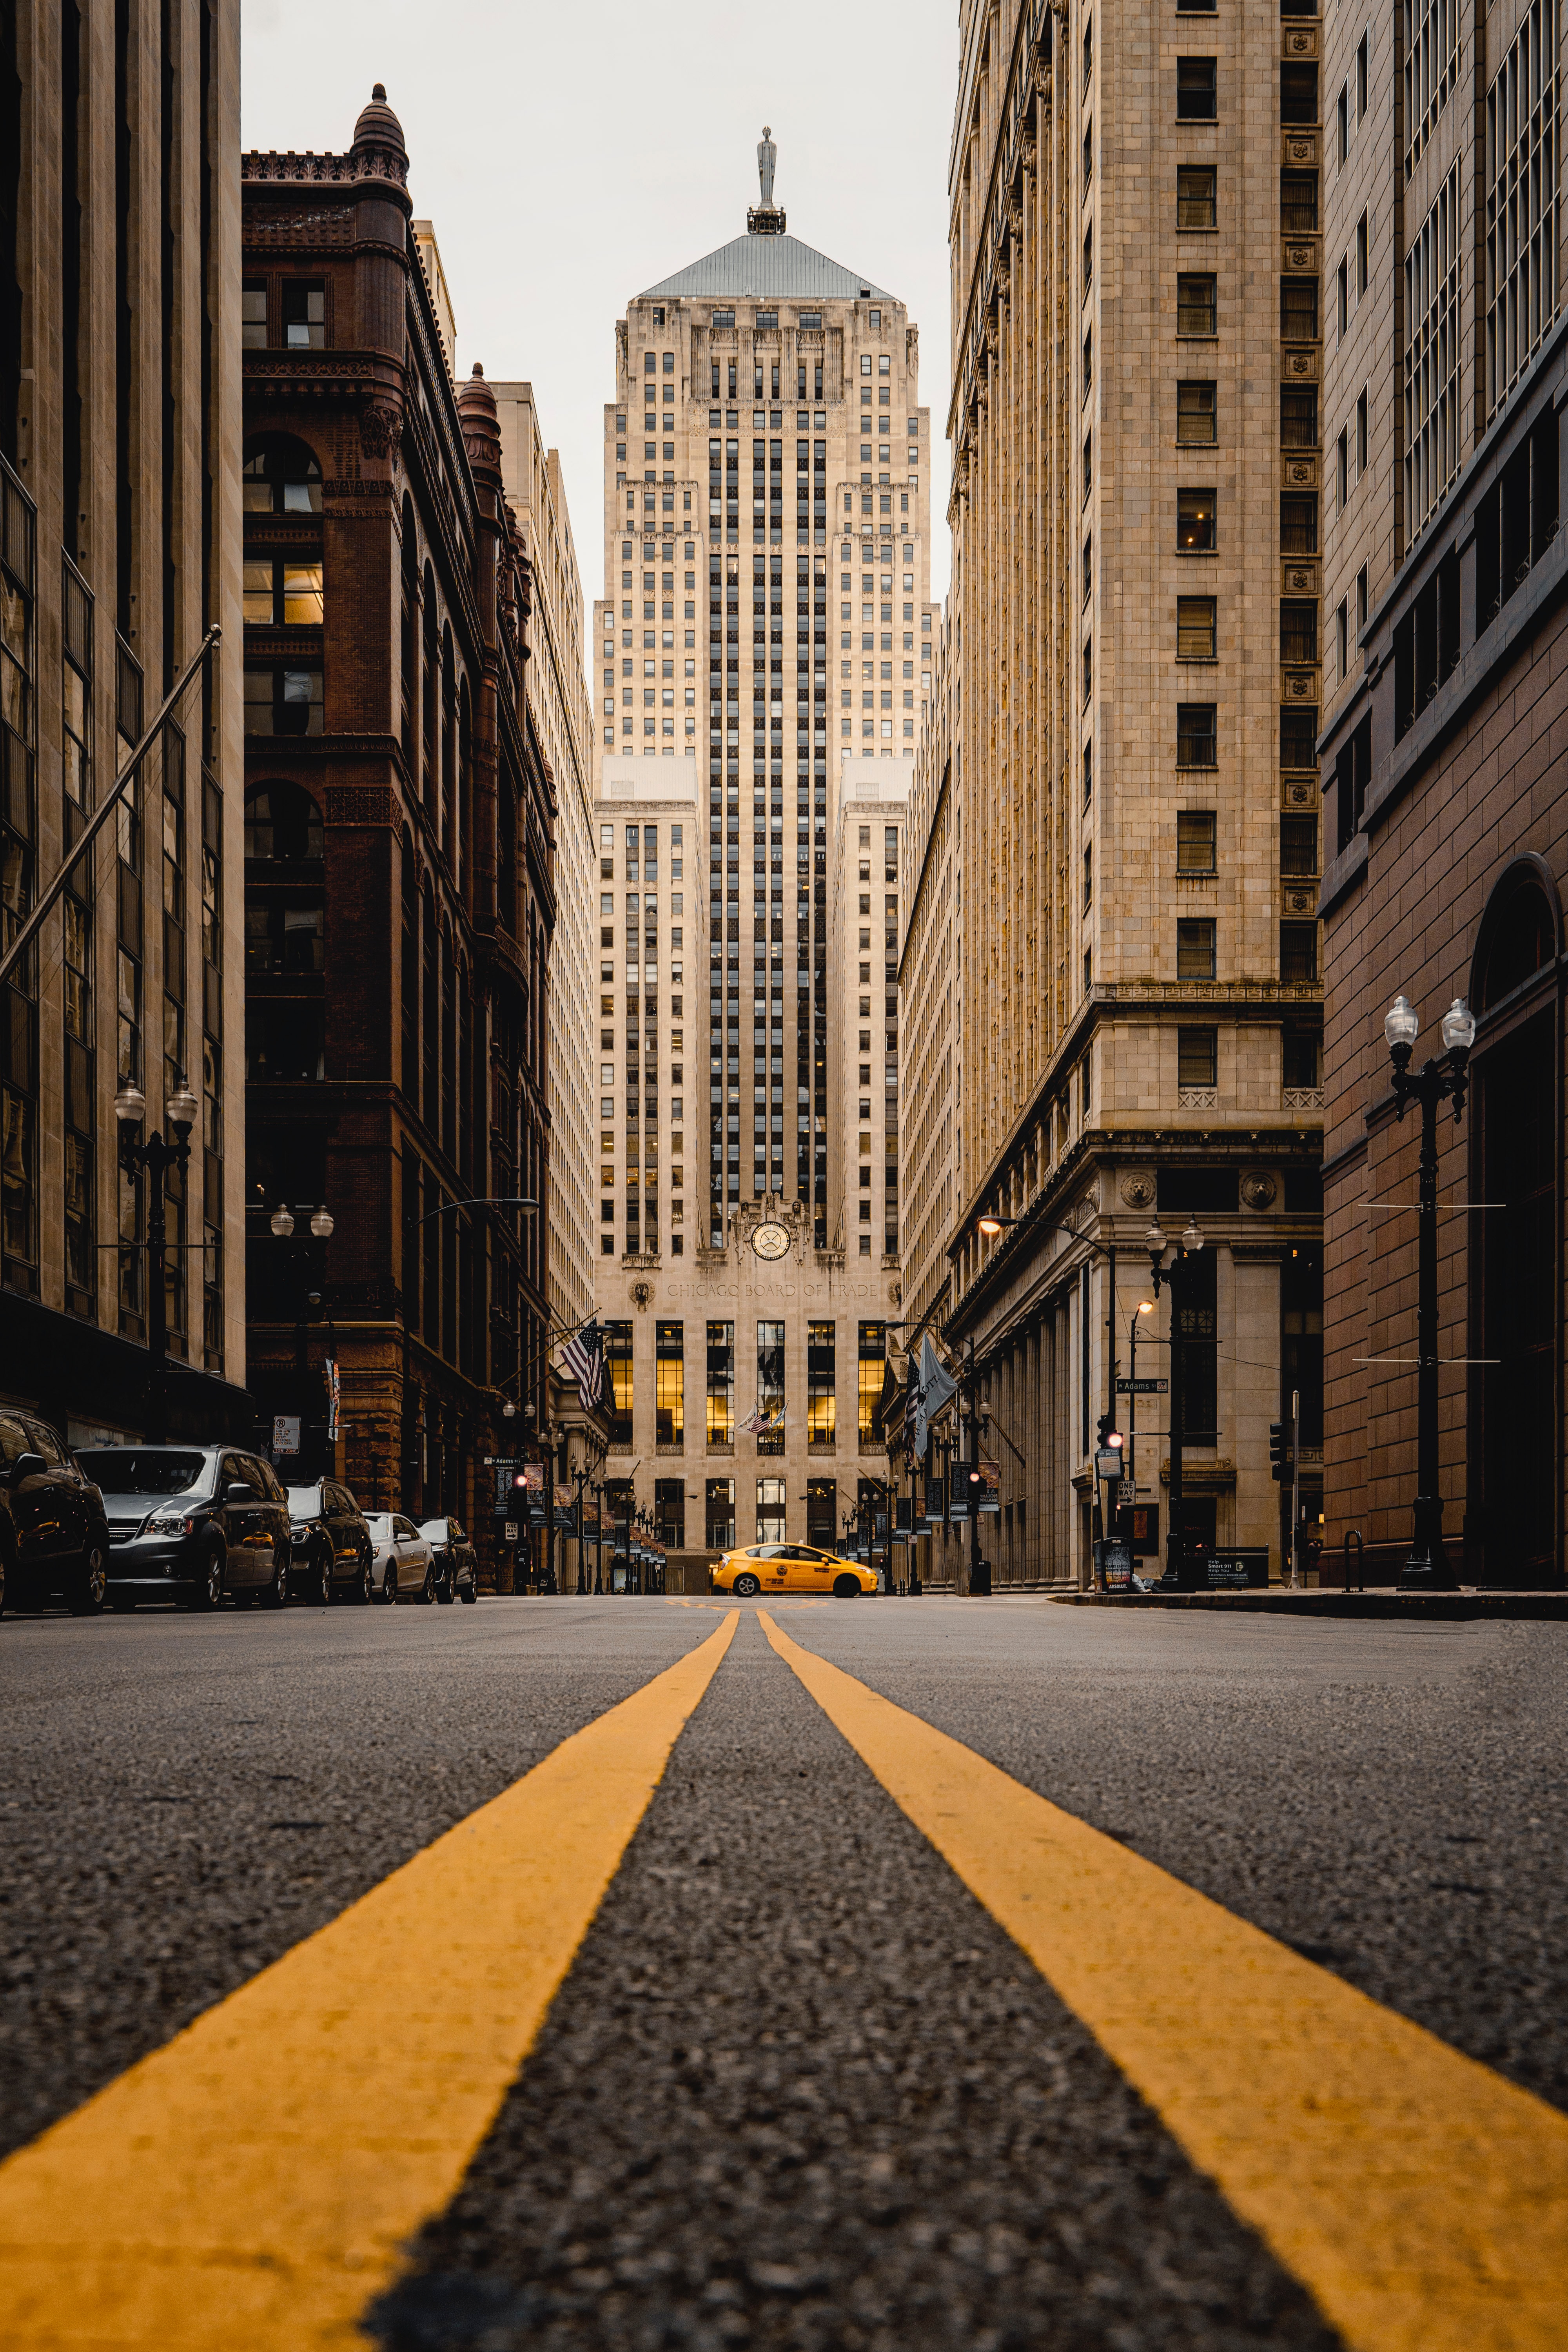 cities, architecture, city, building, road, markup